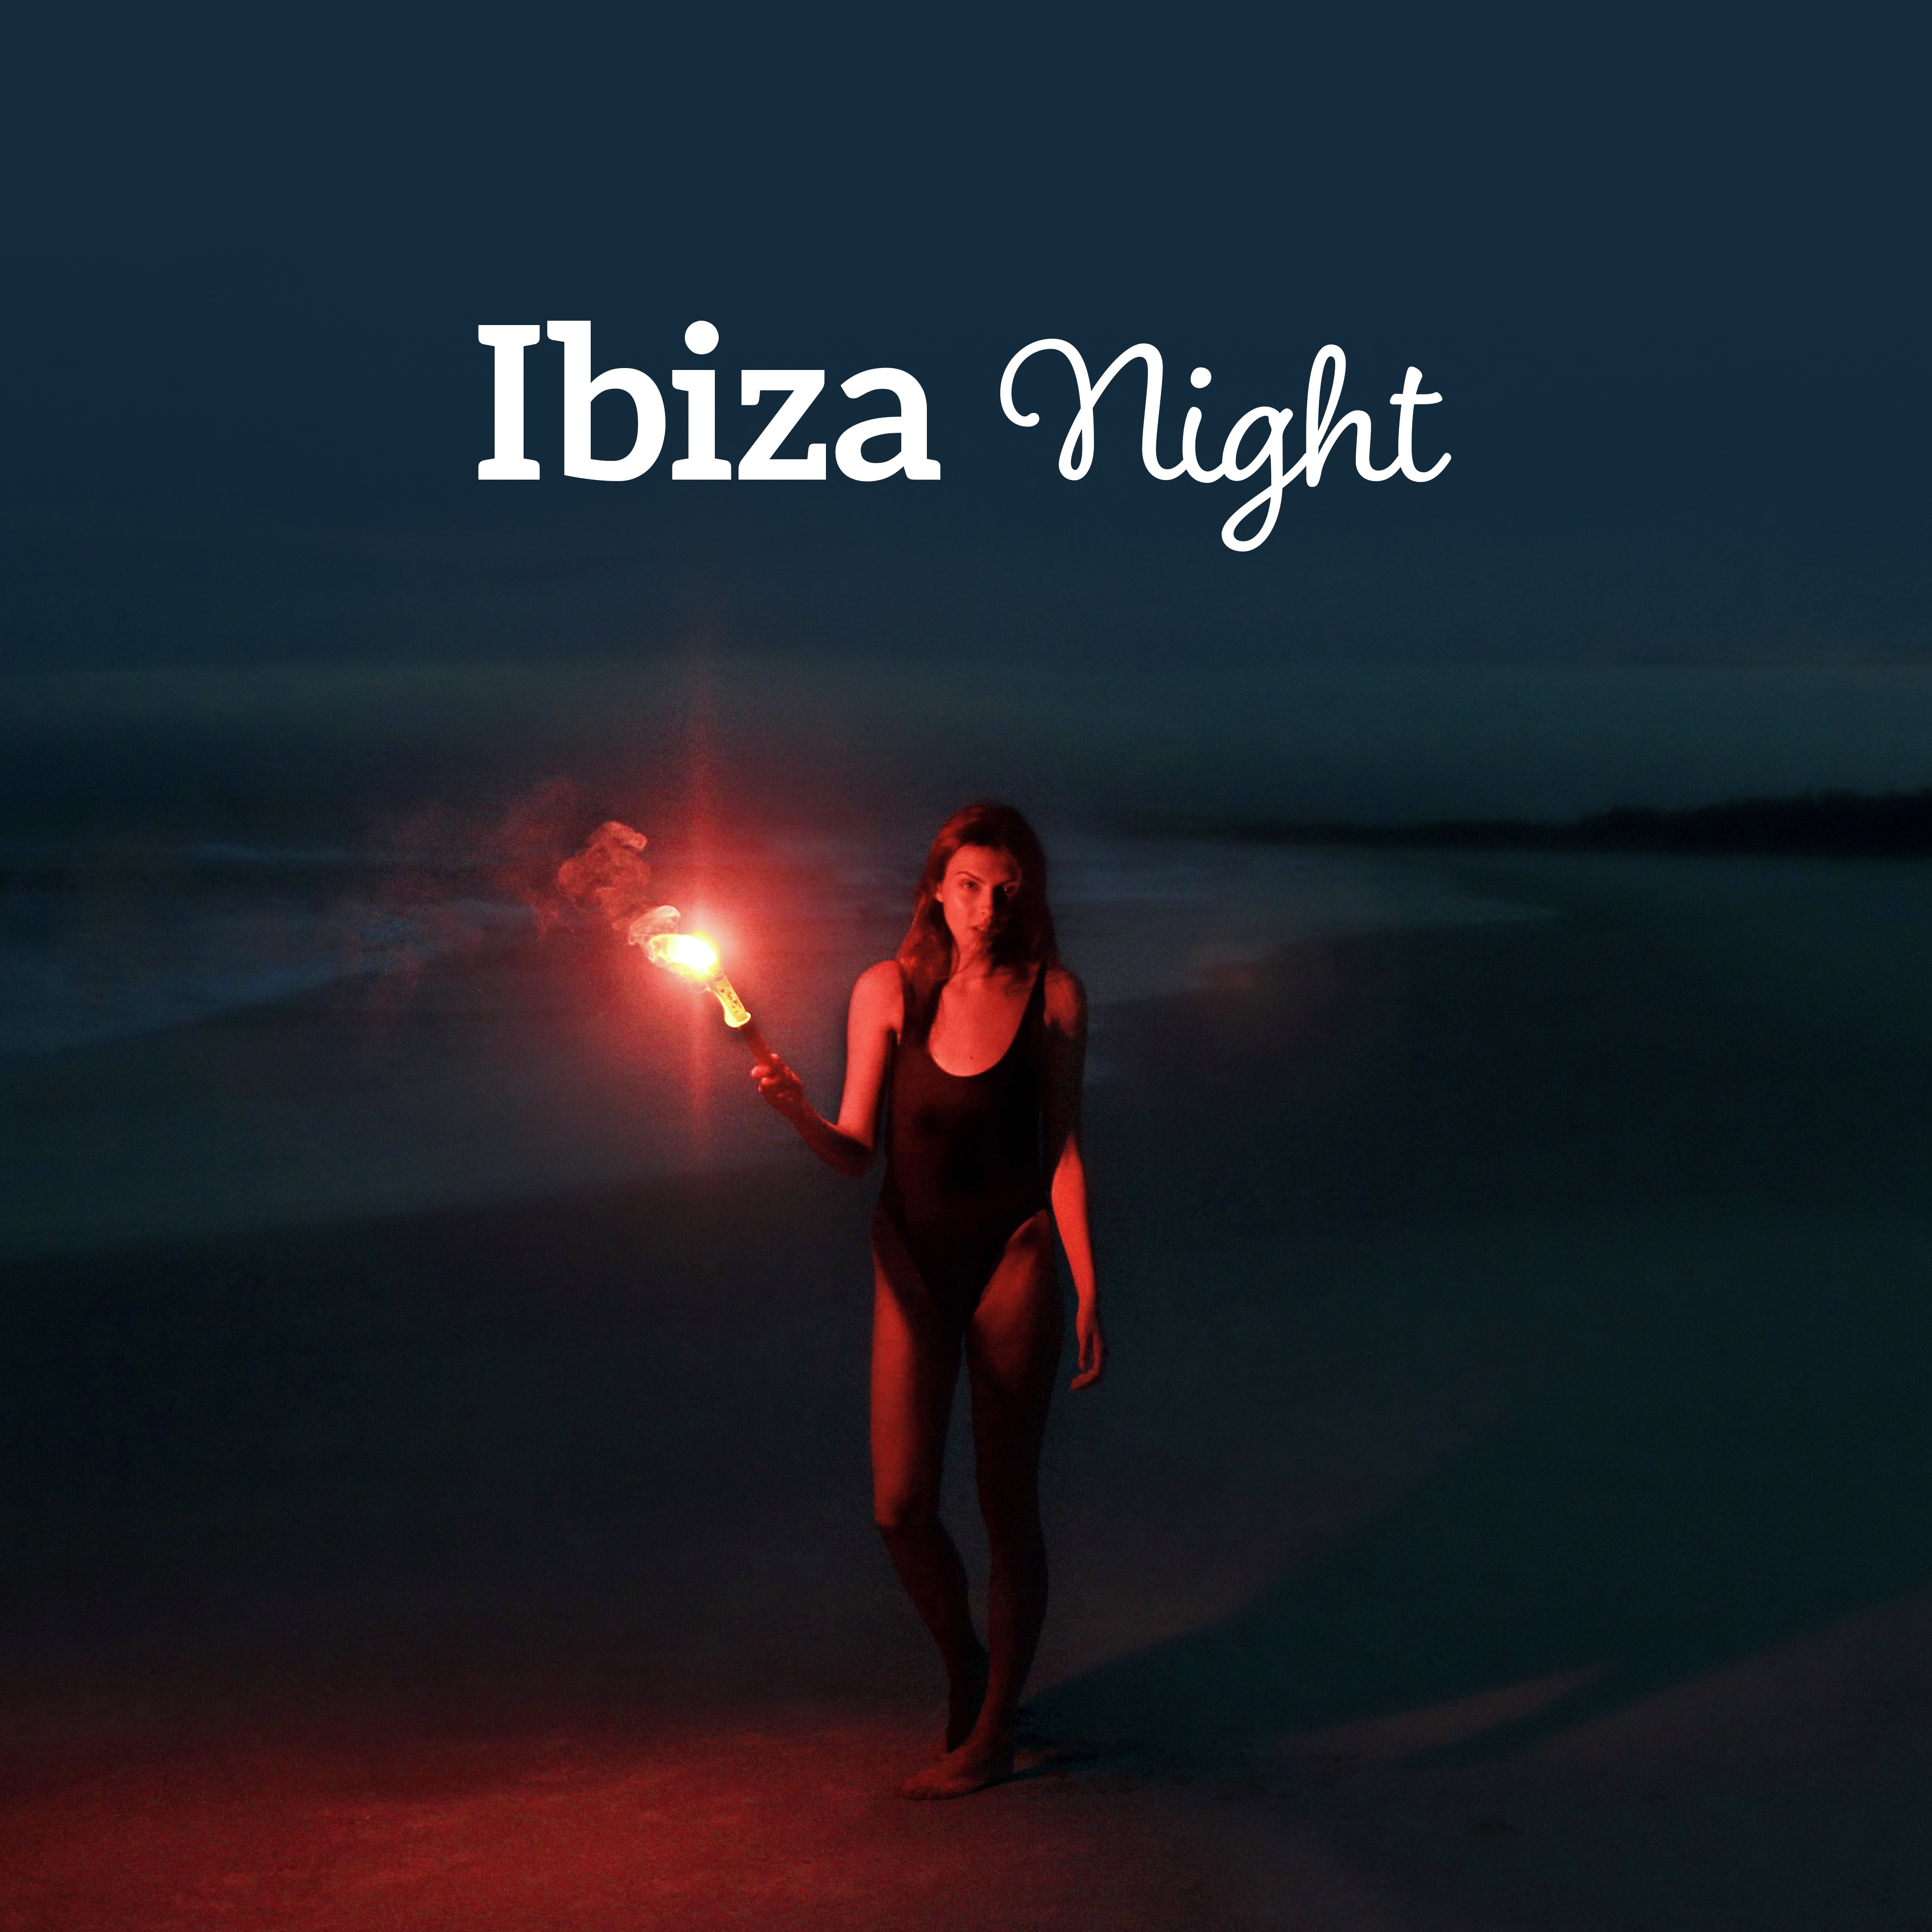 Ibiza Night – Summer Chill Out Hits, Party Music, Dance, Beach, Sunset Party, Relax